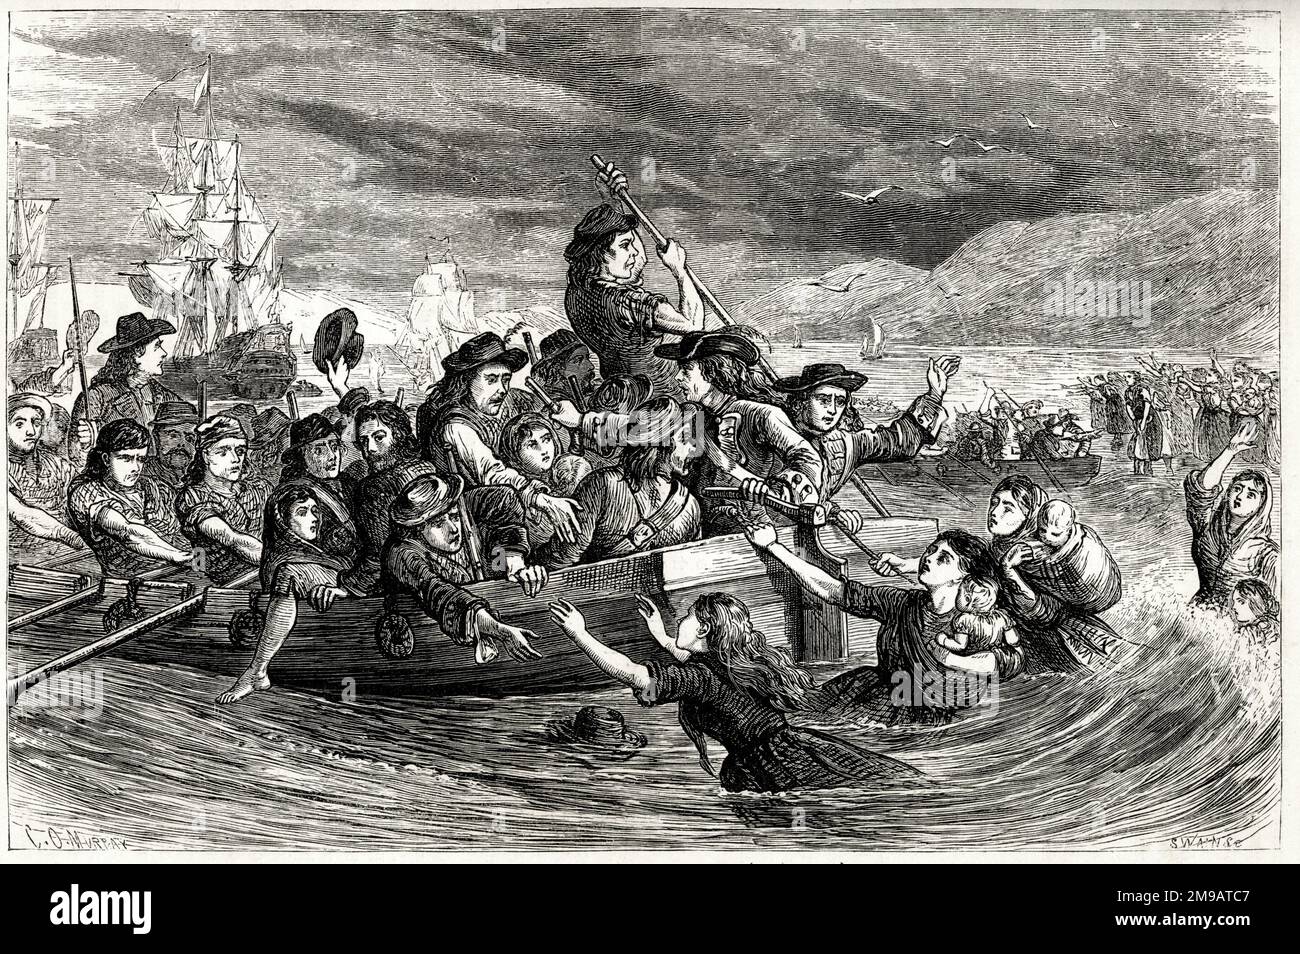 Irish Jacobite troops leaving Limerick for France, also known as the Flight of the Wild Geese, following the Treaty of Limerick, 3 October 1691. Women with children attempted to join them, resulting in some of them perishing in the water. Stock Photo